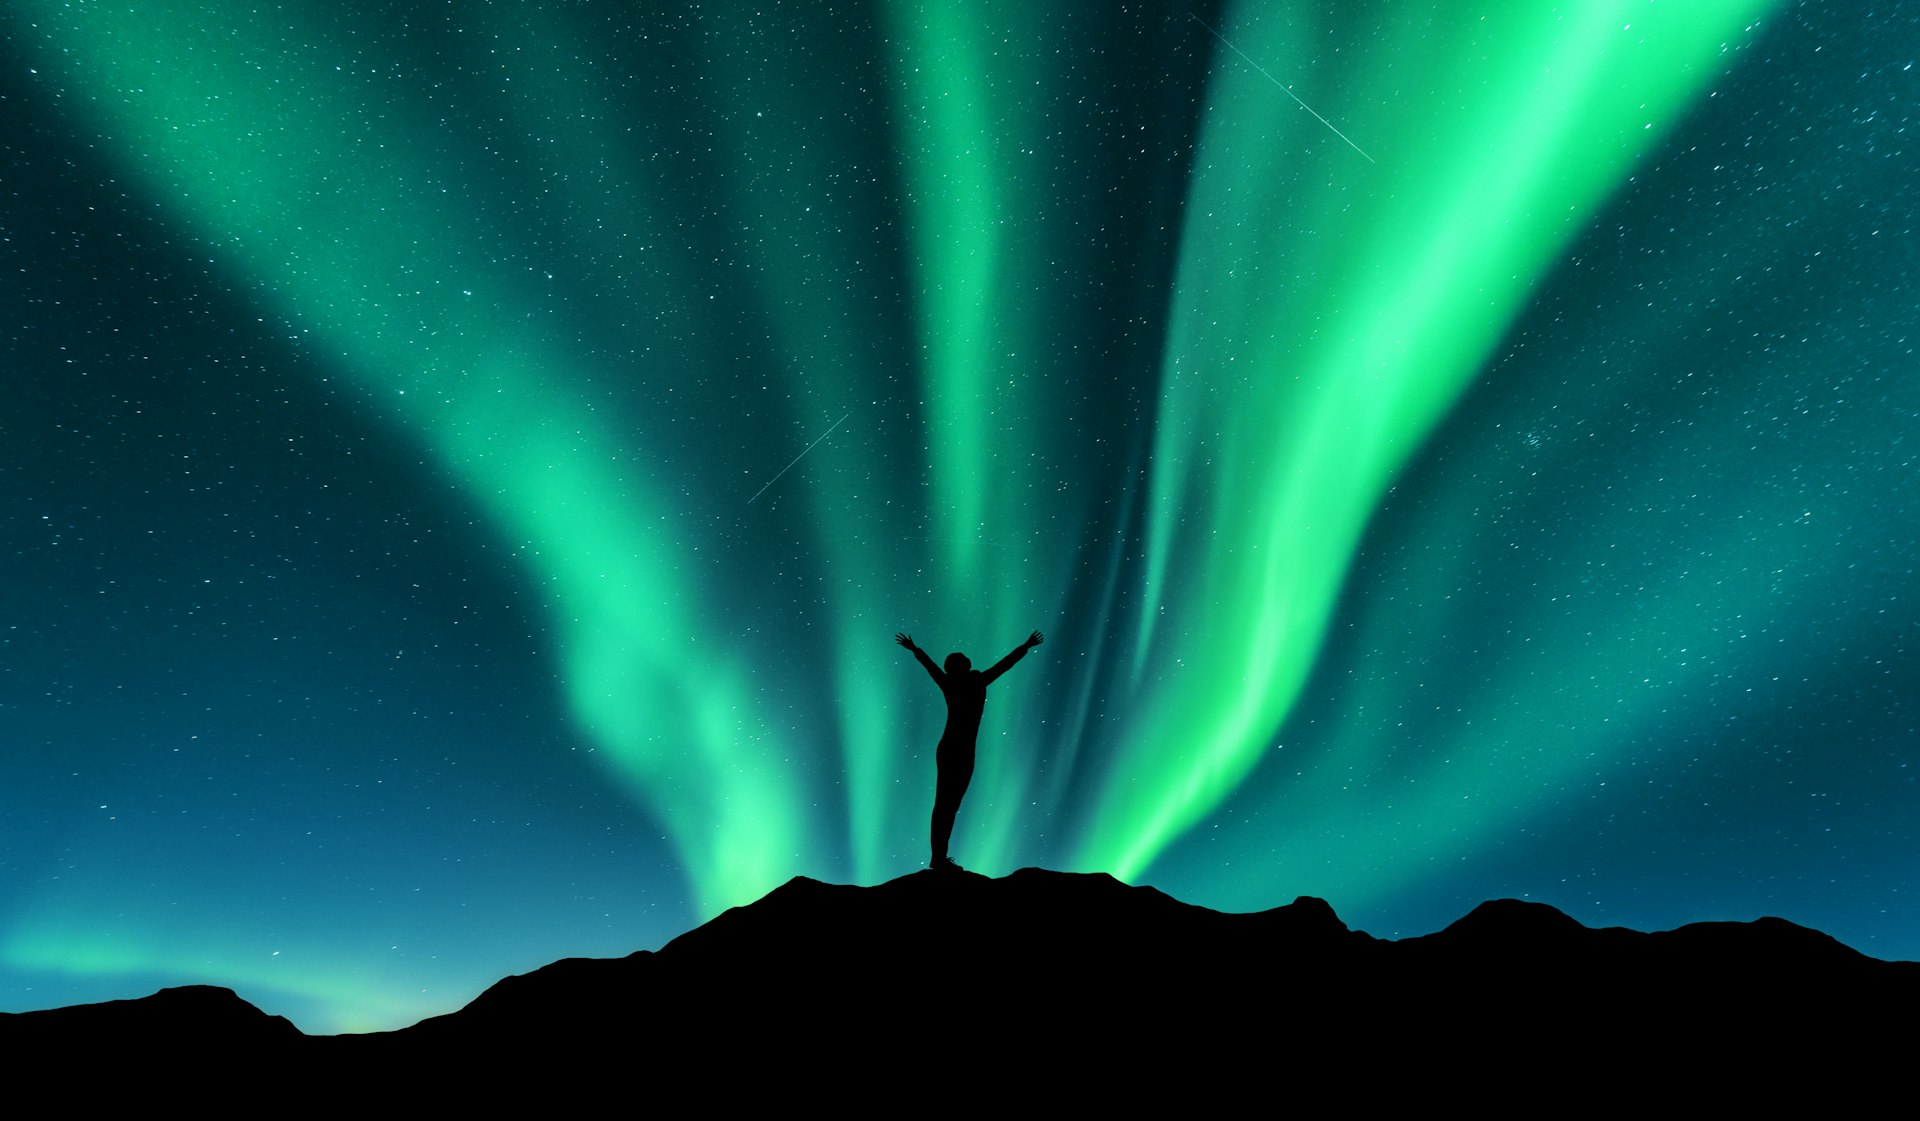 A silhouette of a person with outstretched arms standing on a hilltop against the Northern Lights, with vibrant green rays stretching across the starlit sky.